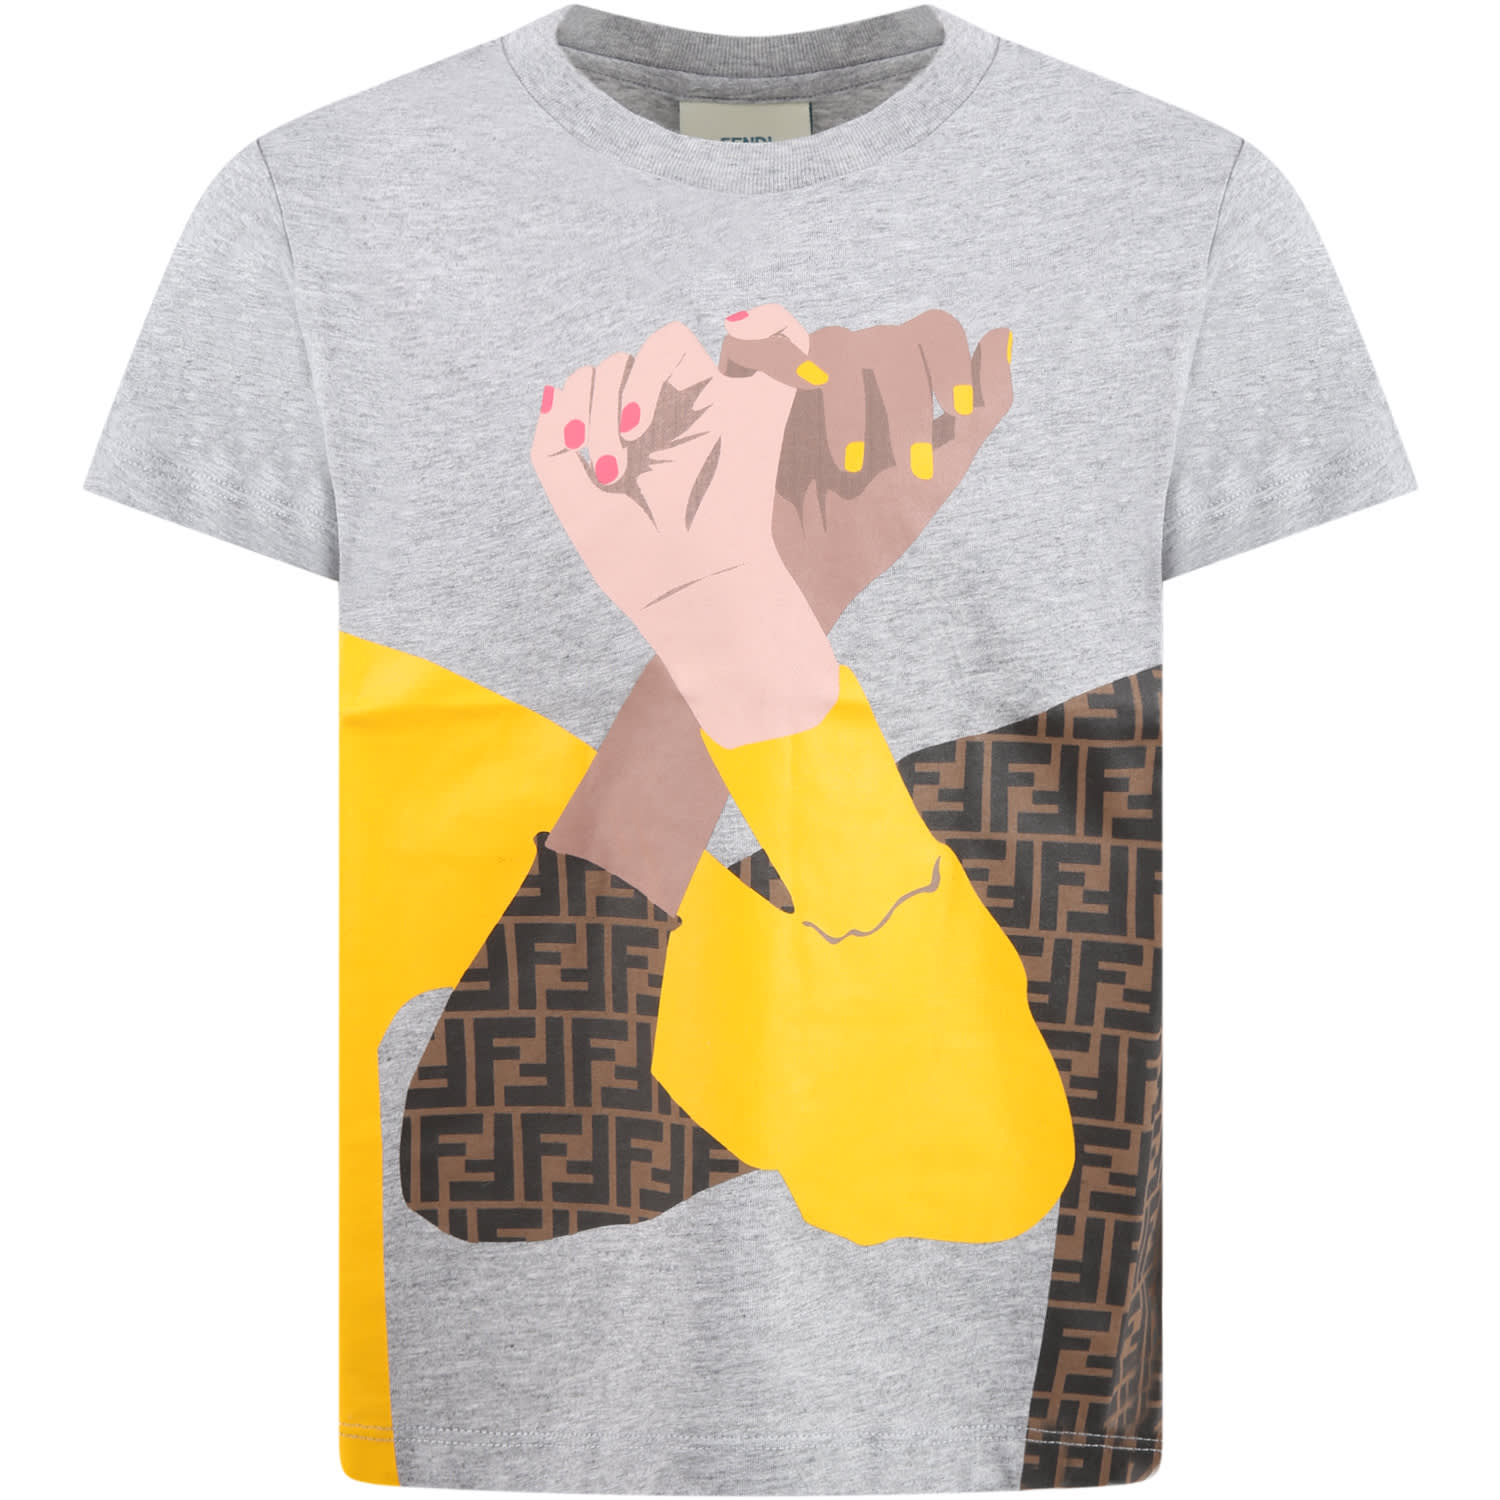 Fendi Grey T-shirt For Kids With Hands